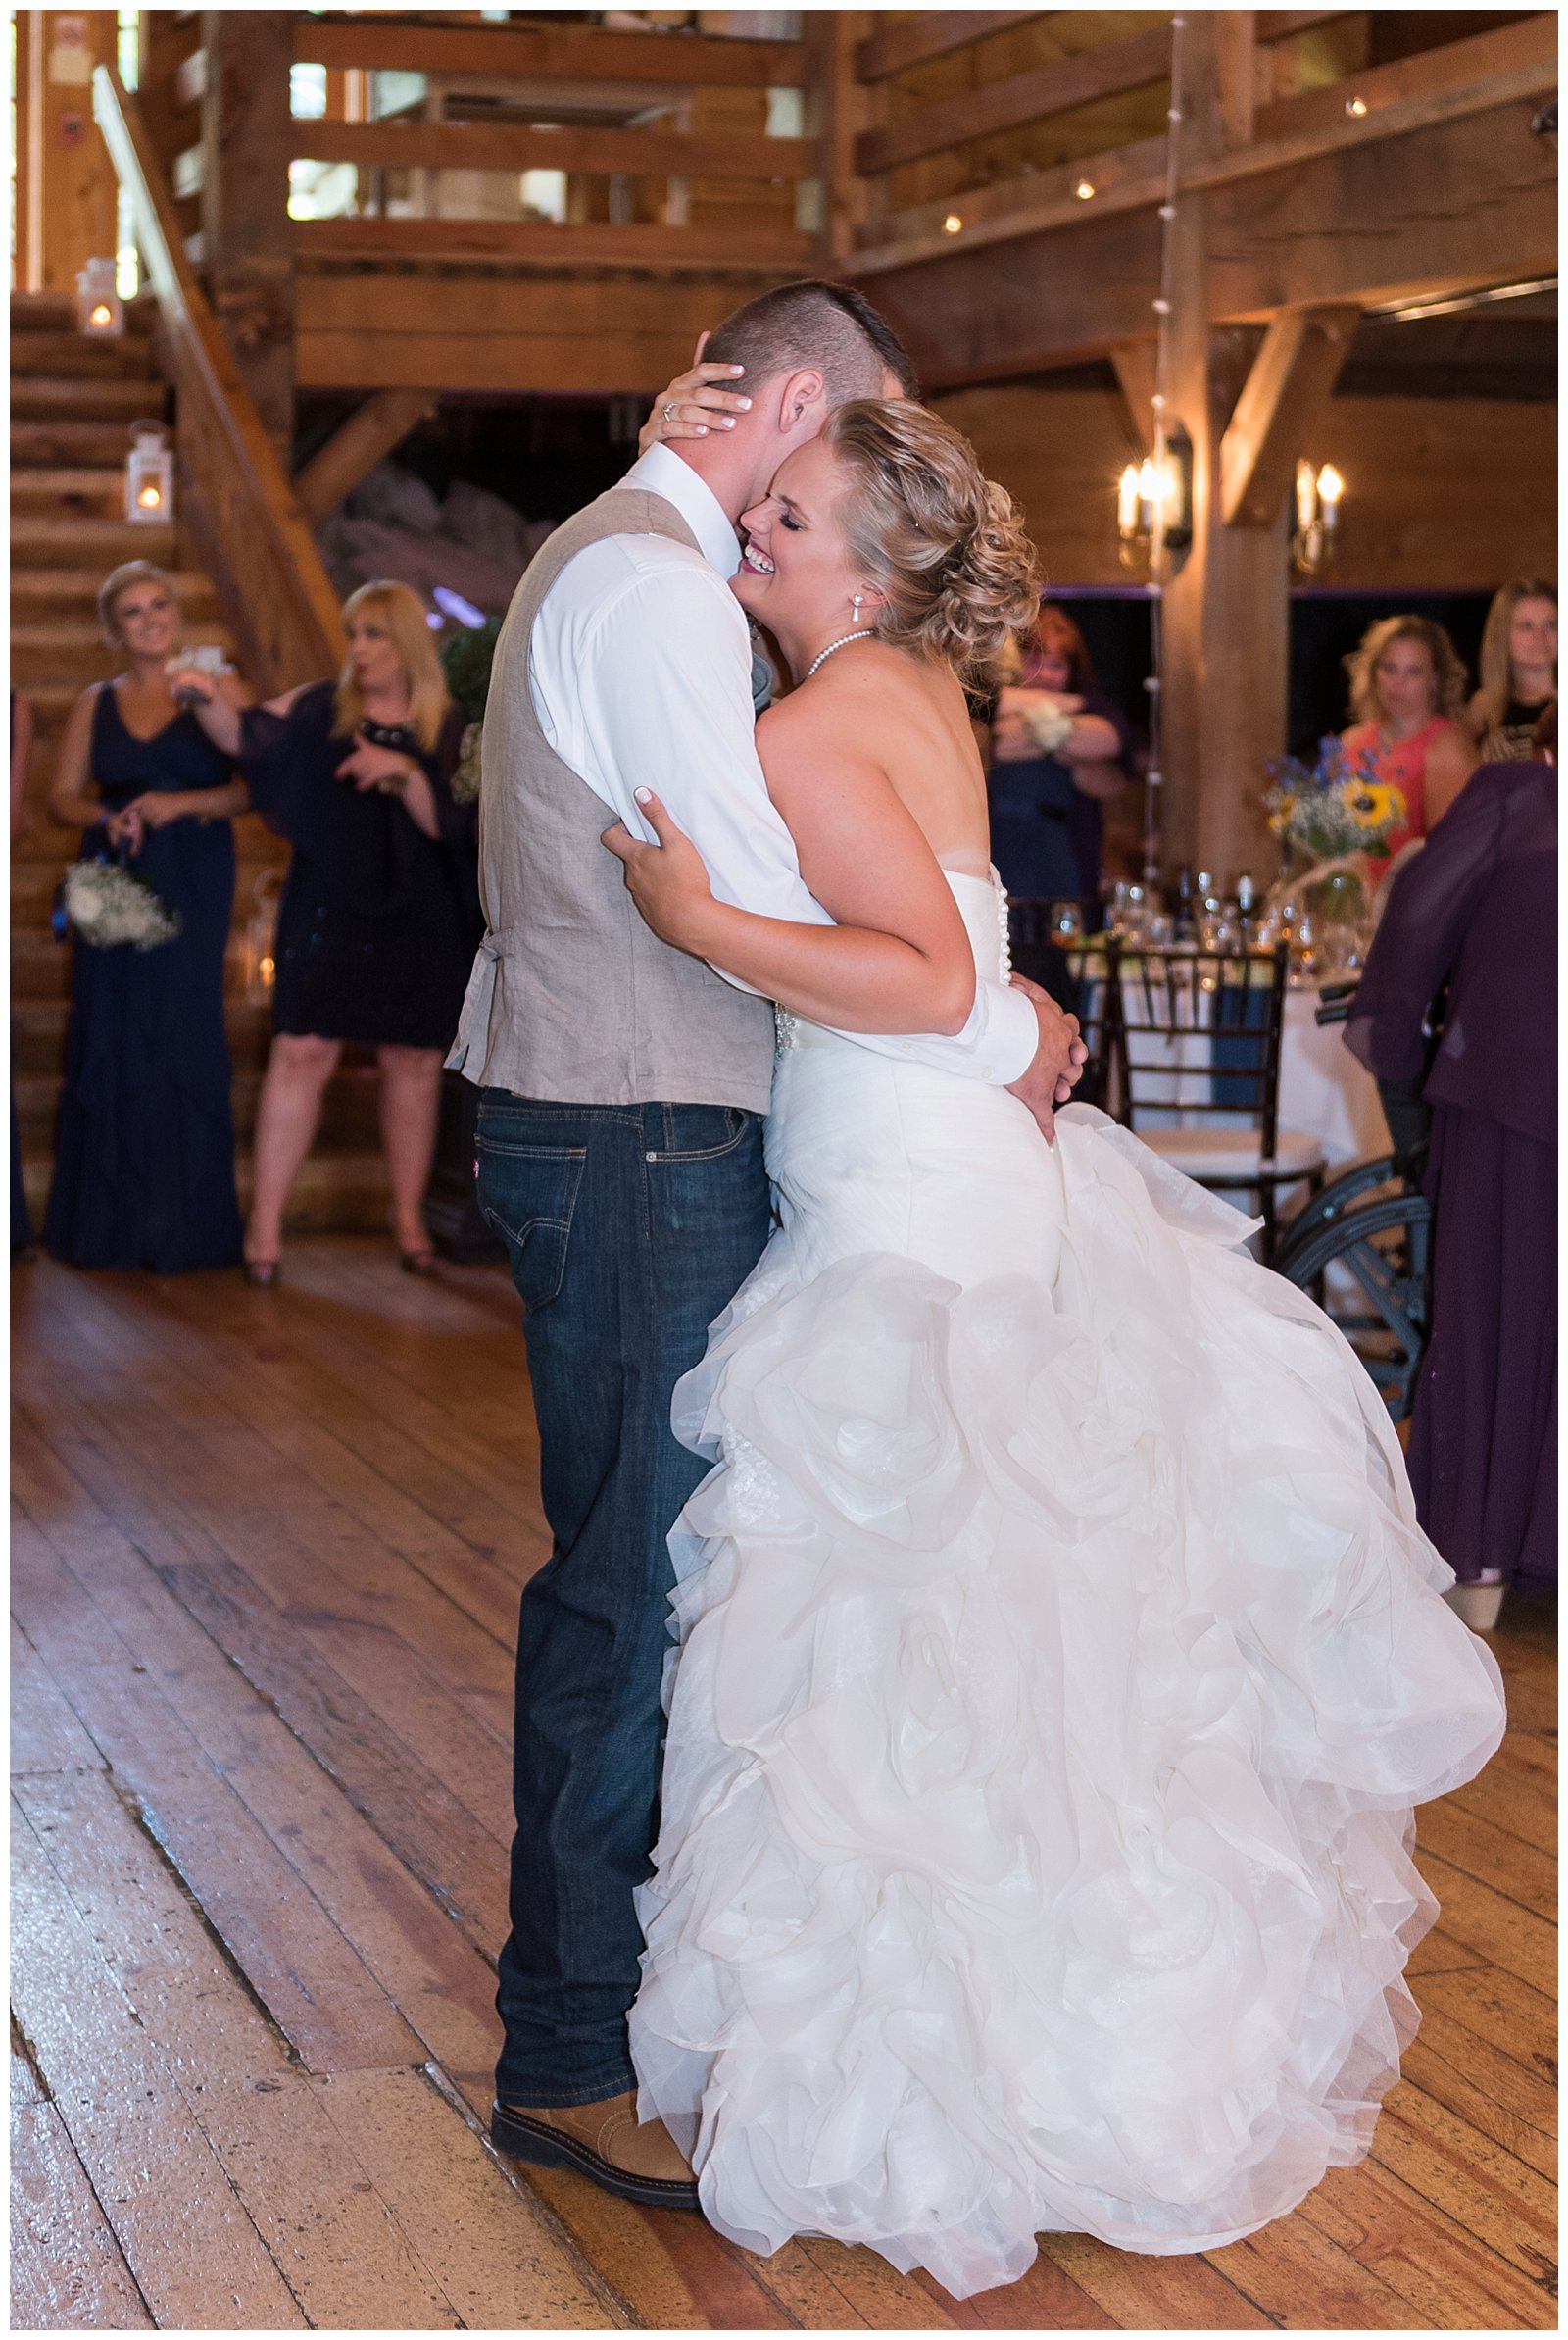 Bride and groom share their first dance at their cohasset red lion inn wedding